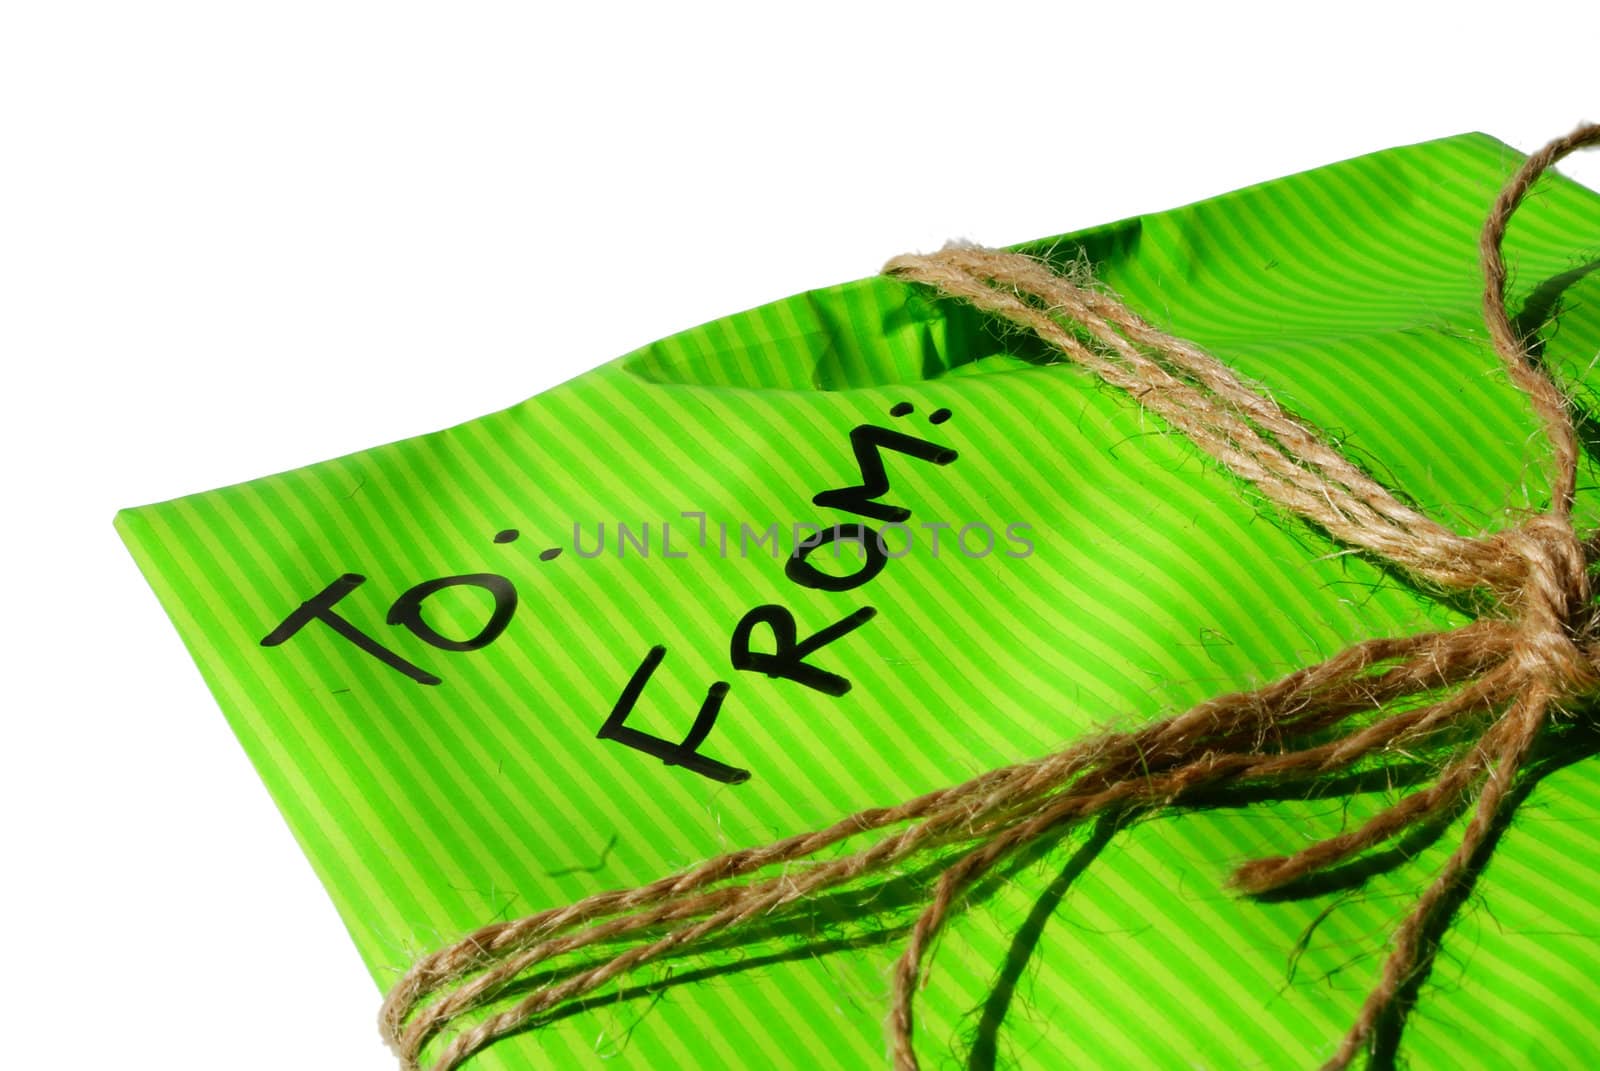 personal letter in a green tied envelope isolated against white background